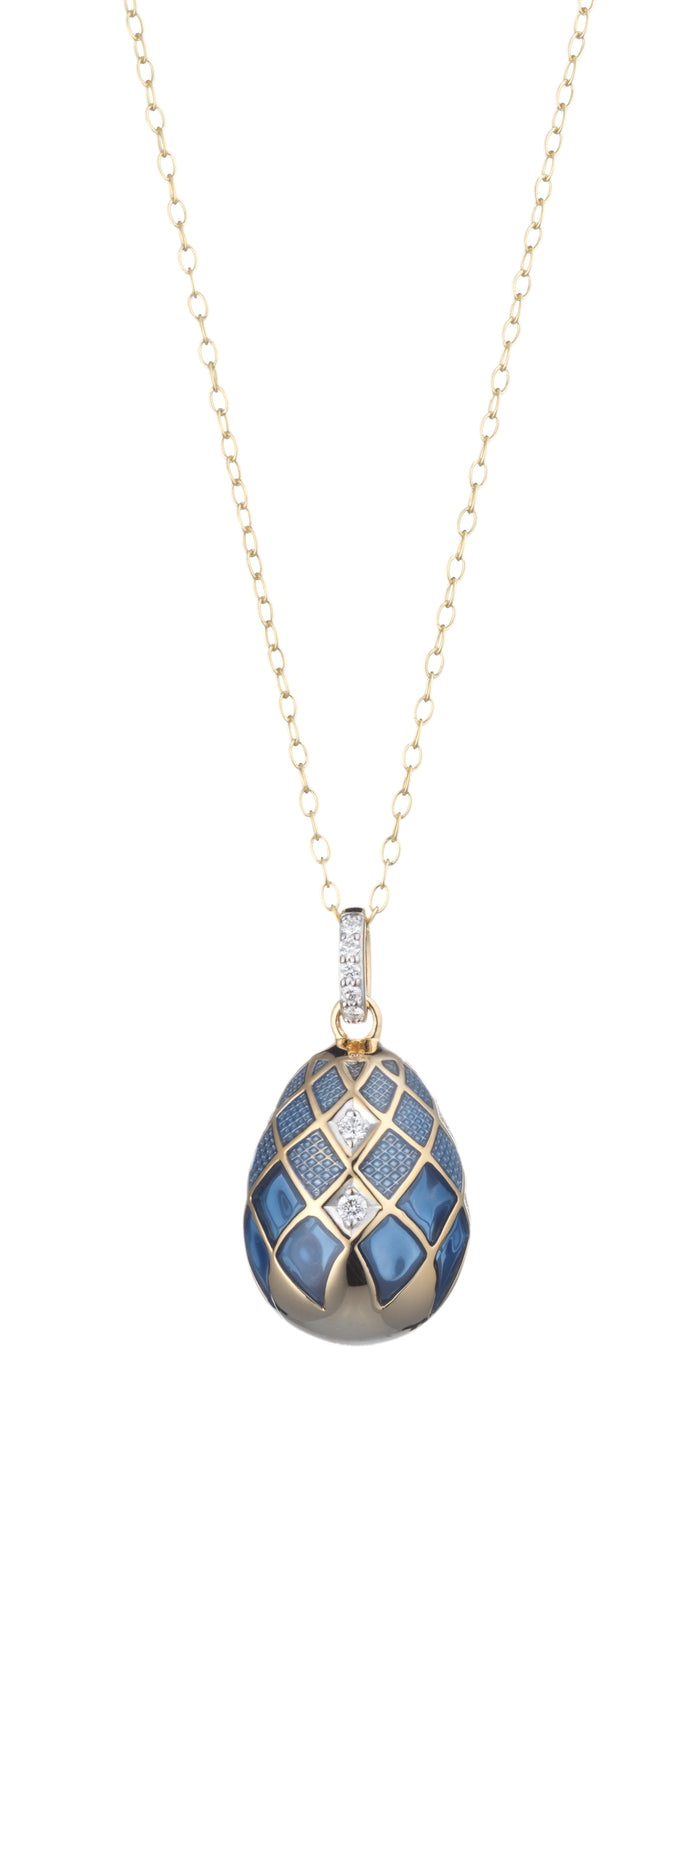 Empress Maria Quilted Egg Pendant Necklace Tsars Collection by Tatiana Fabergé SA – Empress Maria – Necklace